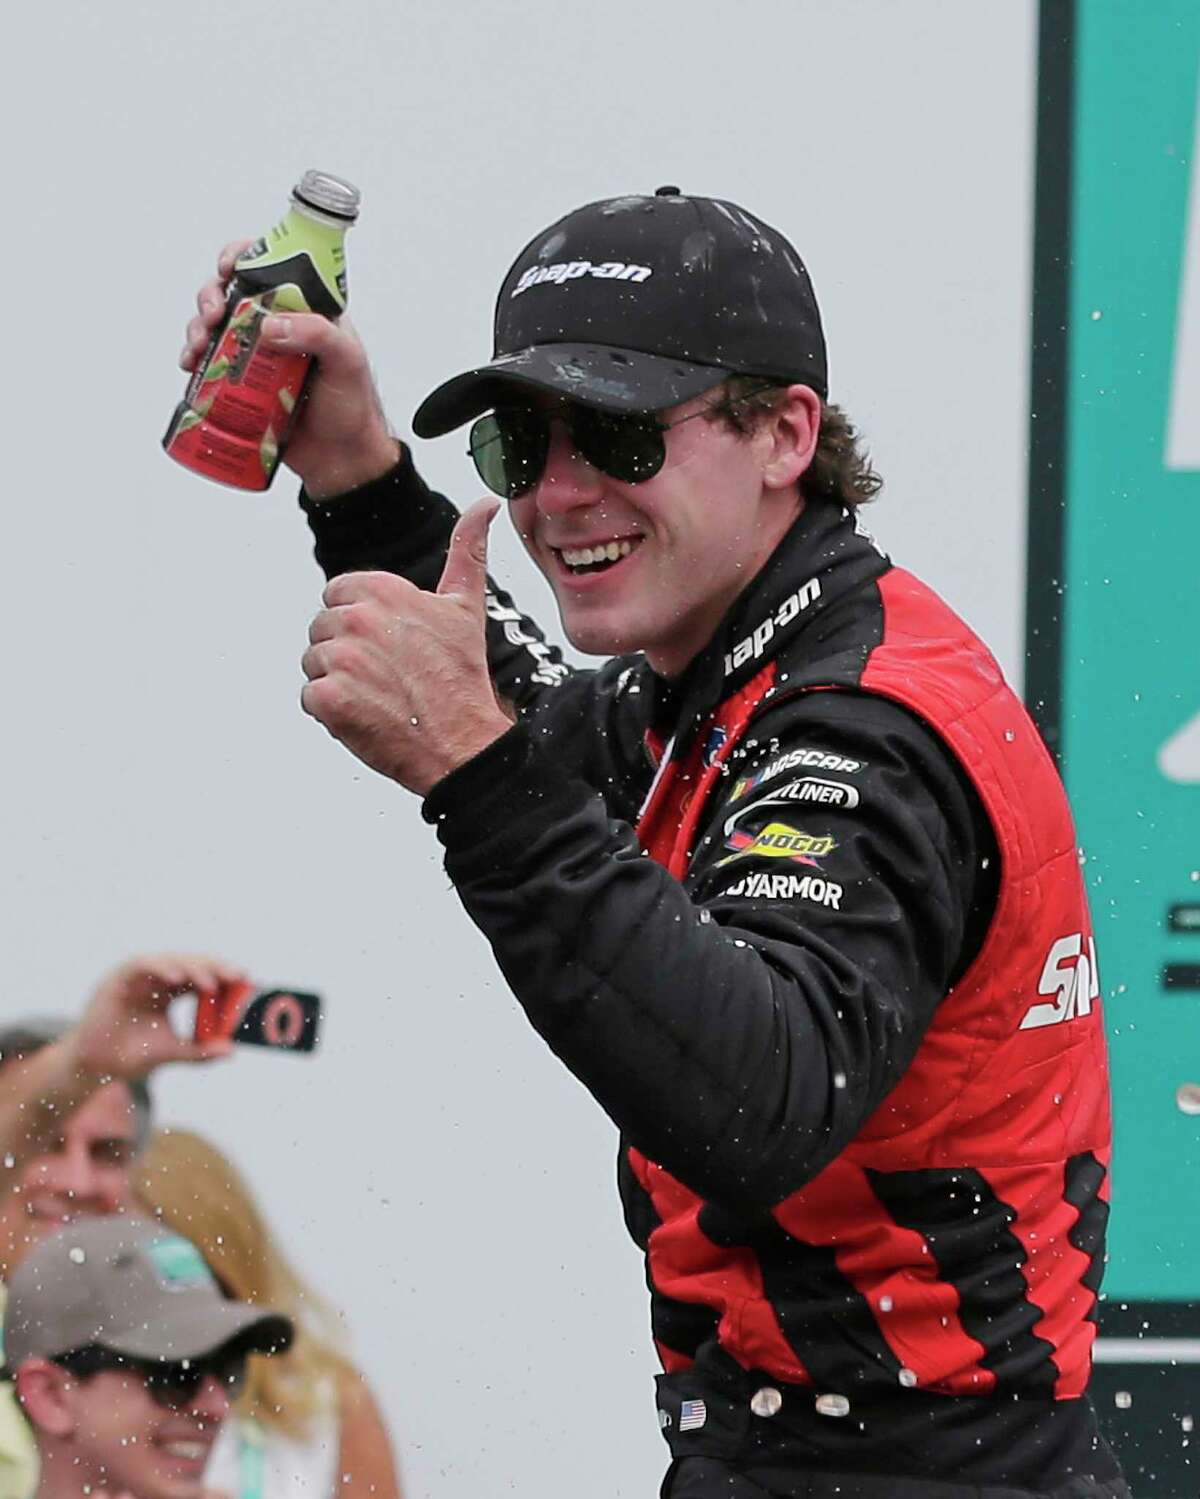 Ryan Blaney celebrates in Victory Lane after winning the NASCAR Xfinity series auto race at Charlotte Motor Speedway in Concord, N.C., Saturday, May 27, 2017. (AP Photo/Chuck Burton)